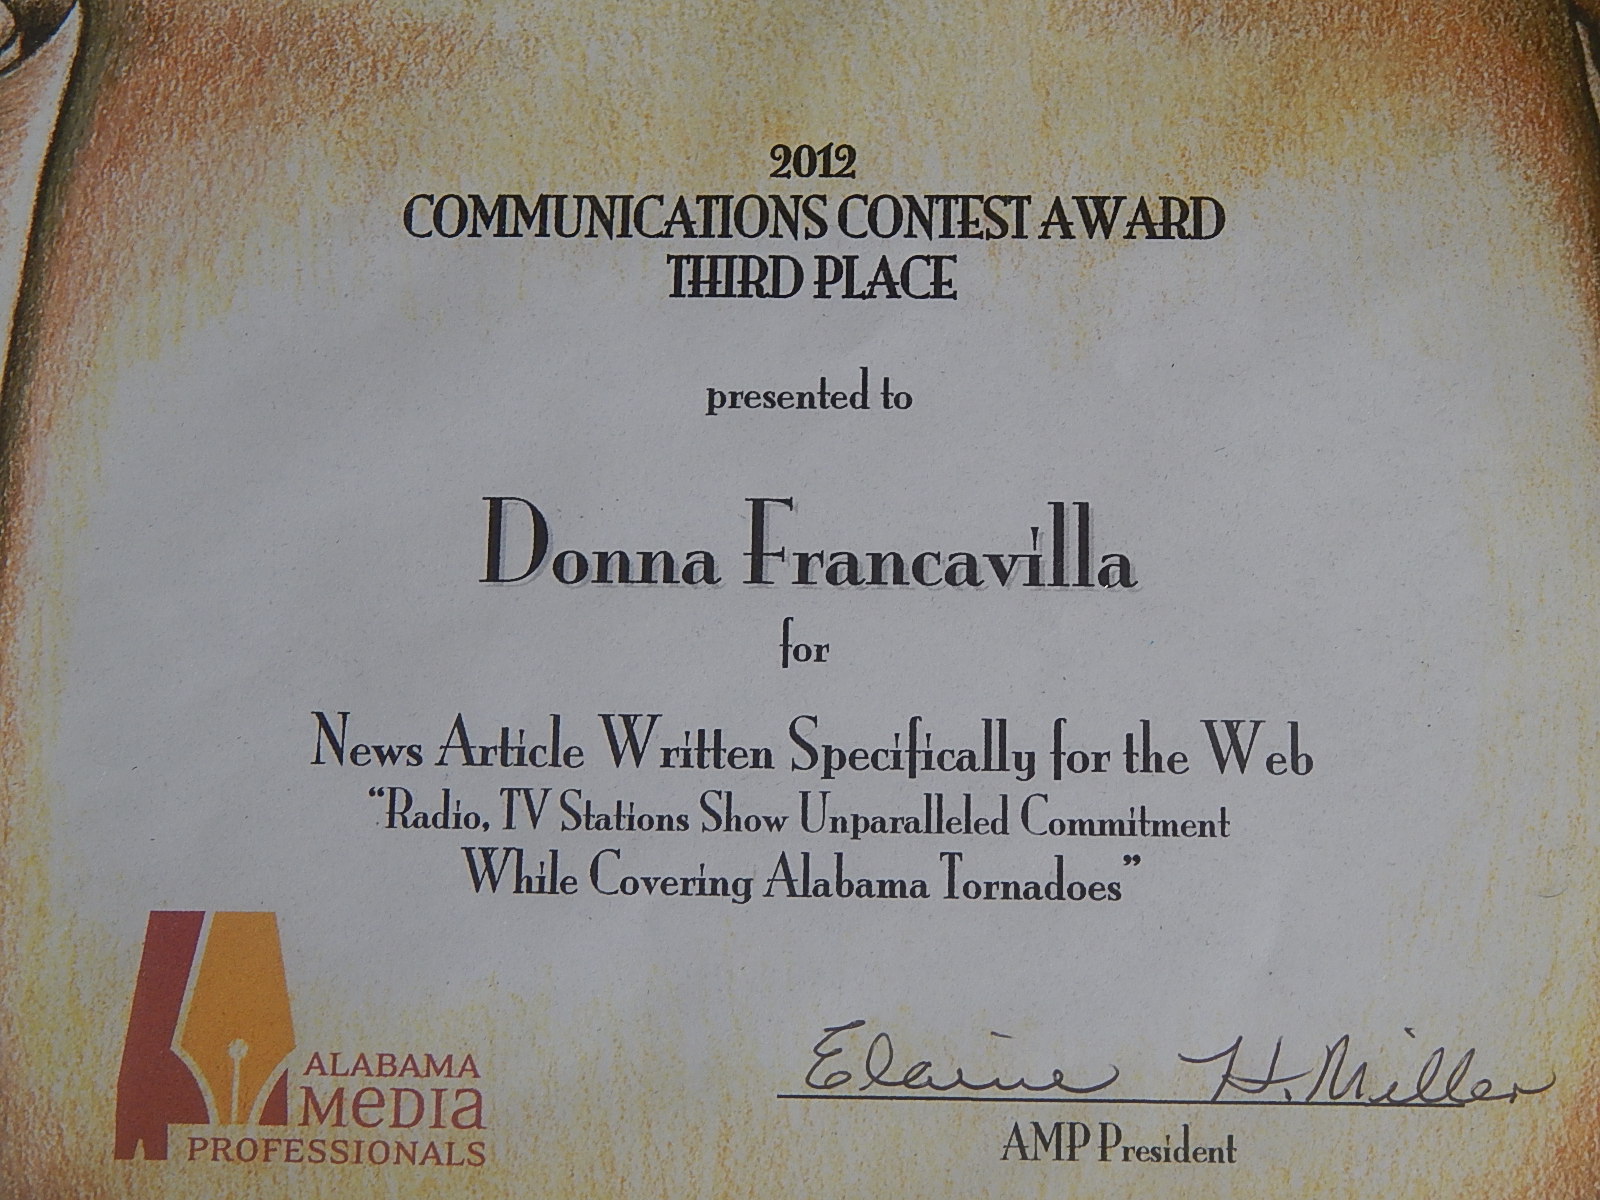 2012 Alabama Media Professionals Communications Contest Award – State Award – Third Place presented to Donna Francavilla for News Article Written Specifically for the Web “Radio, TV Stations Show Unparalleled Commitment While Covering Alabama Tornadoes”